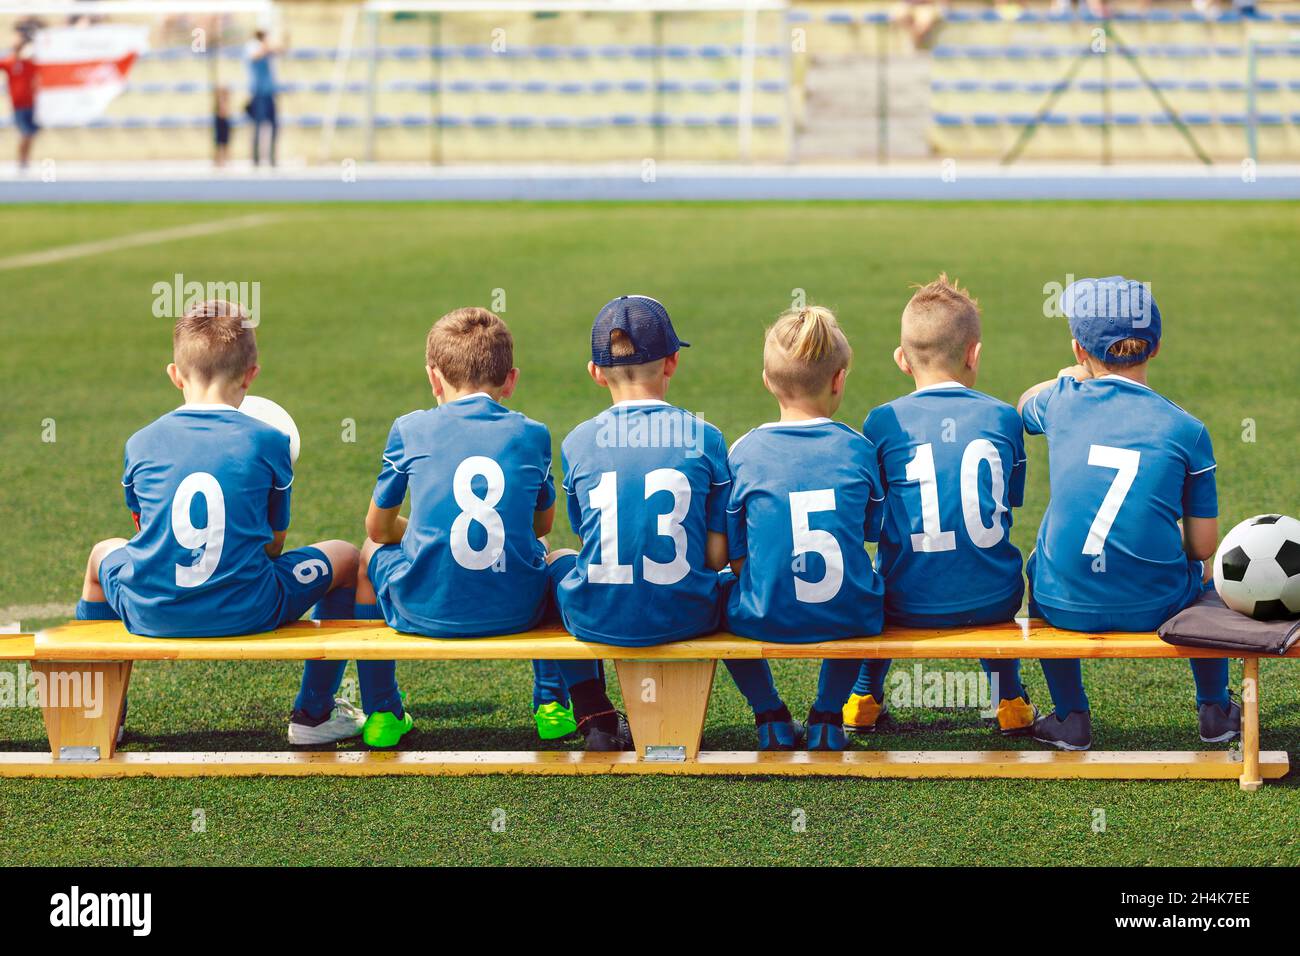 School Boys in Sports Football Team. Kids is Classic Blue Soccer Jersey Uniforms With Numbers. Kids Playing Sports Together. Children Sitting on Sidel Stock Photo